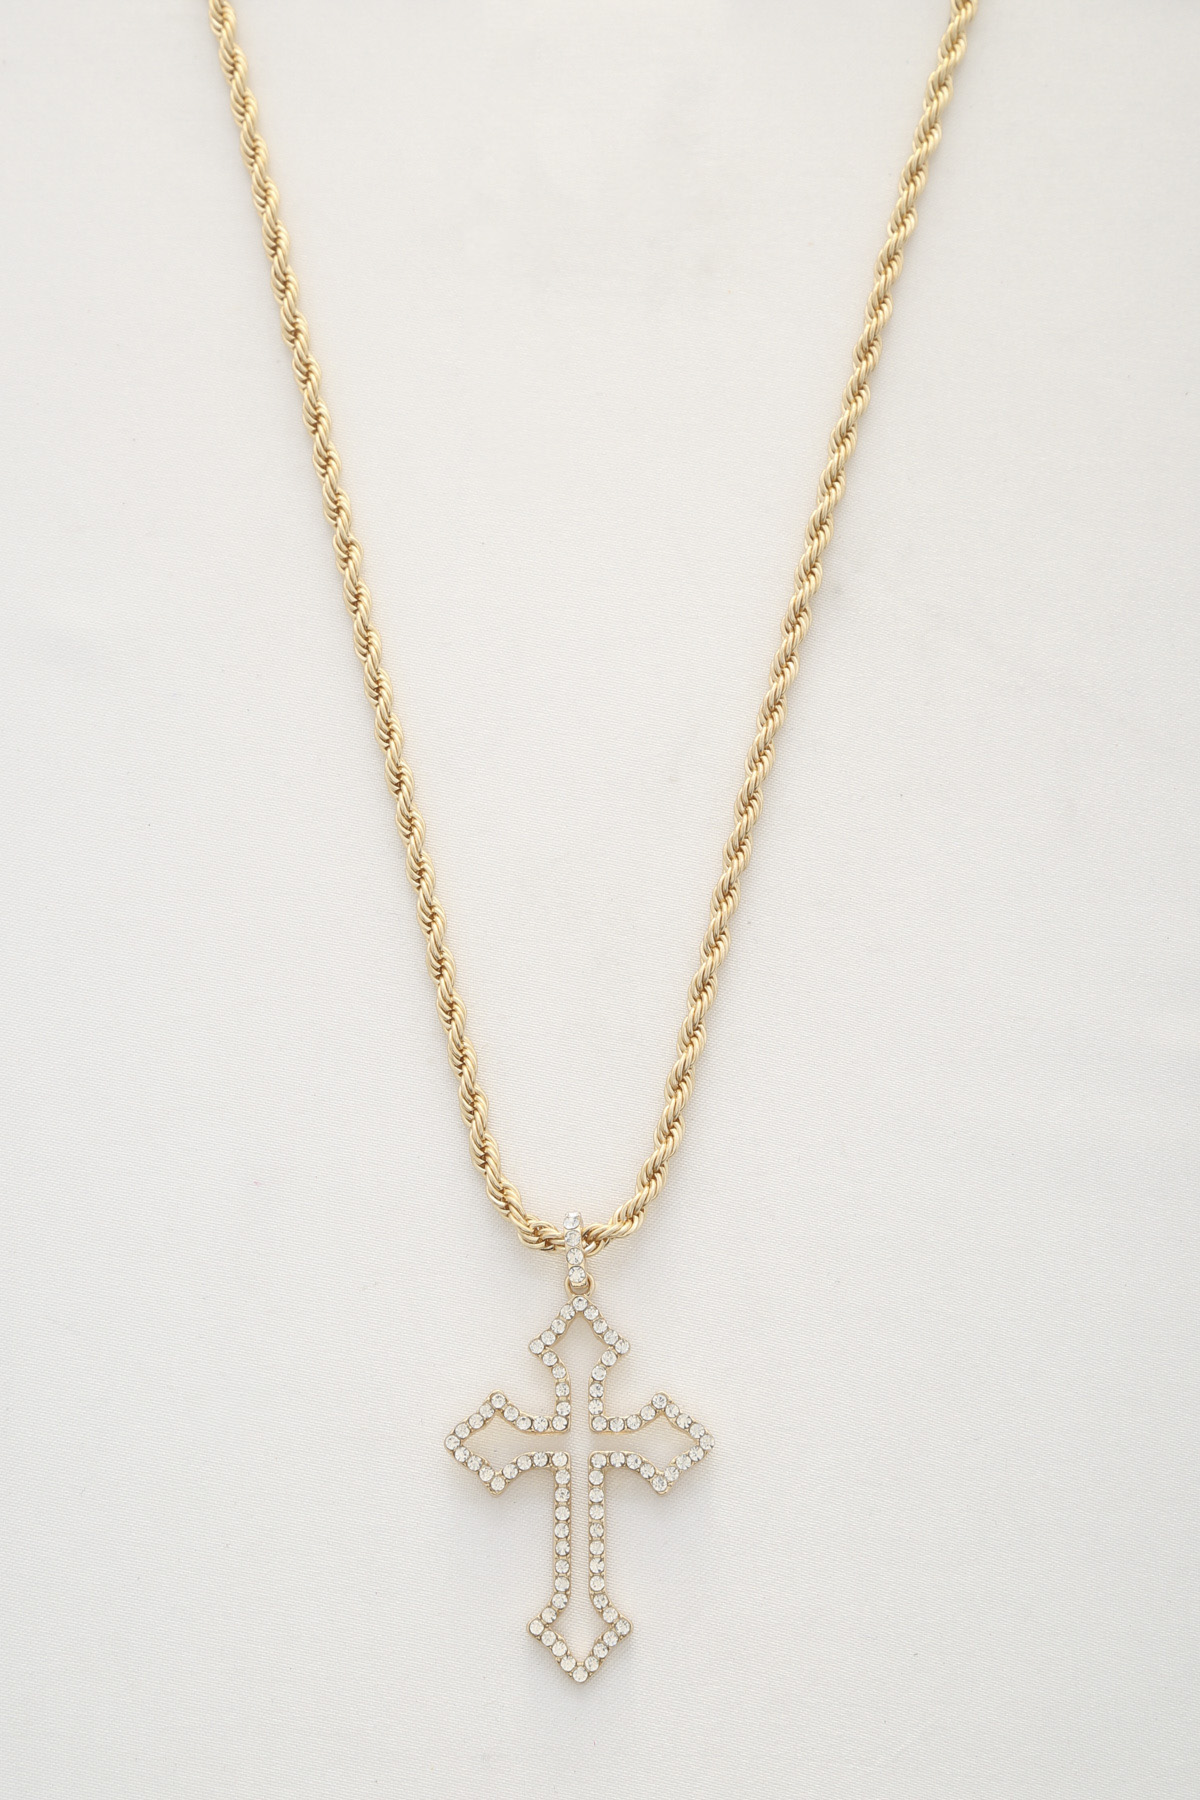 CROSS PENDANT ROPE LINK NECKLACE